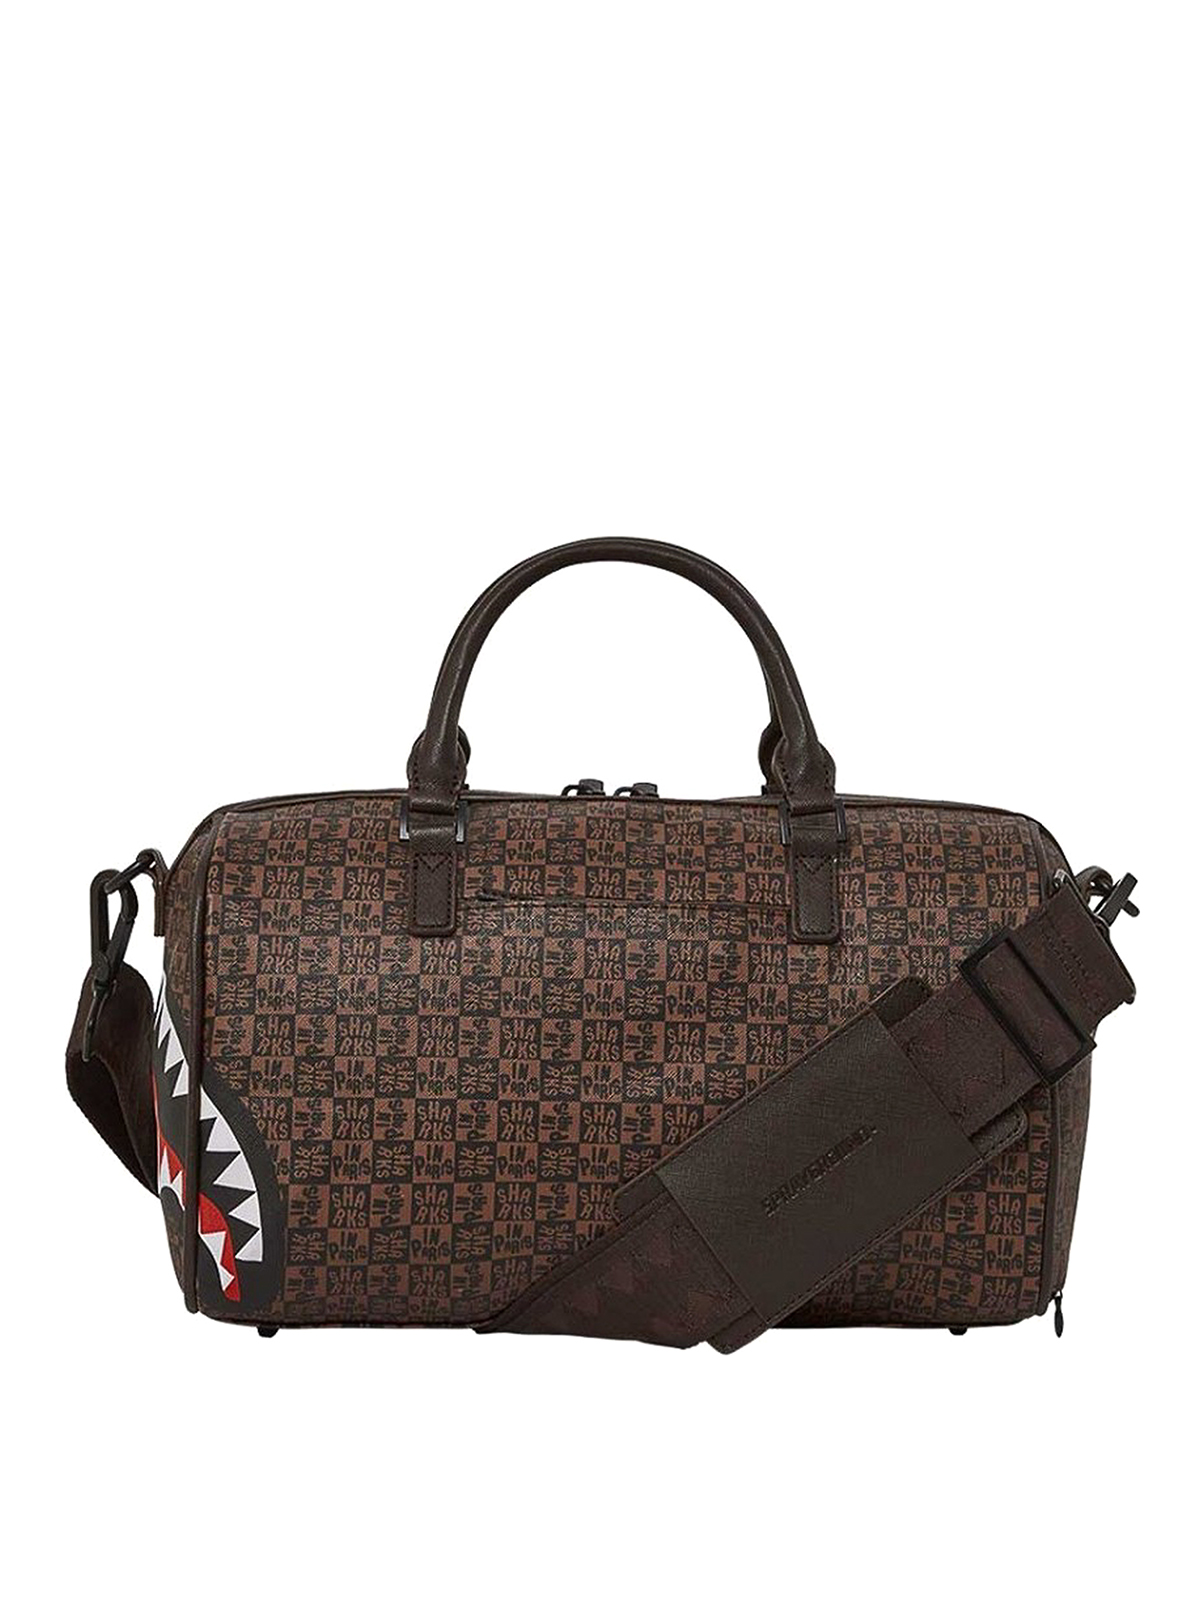 Sprayground Sharks In Paris Check Backpack in Brown for Men